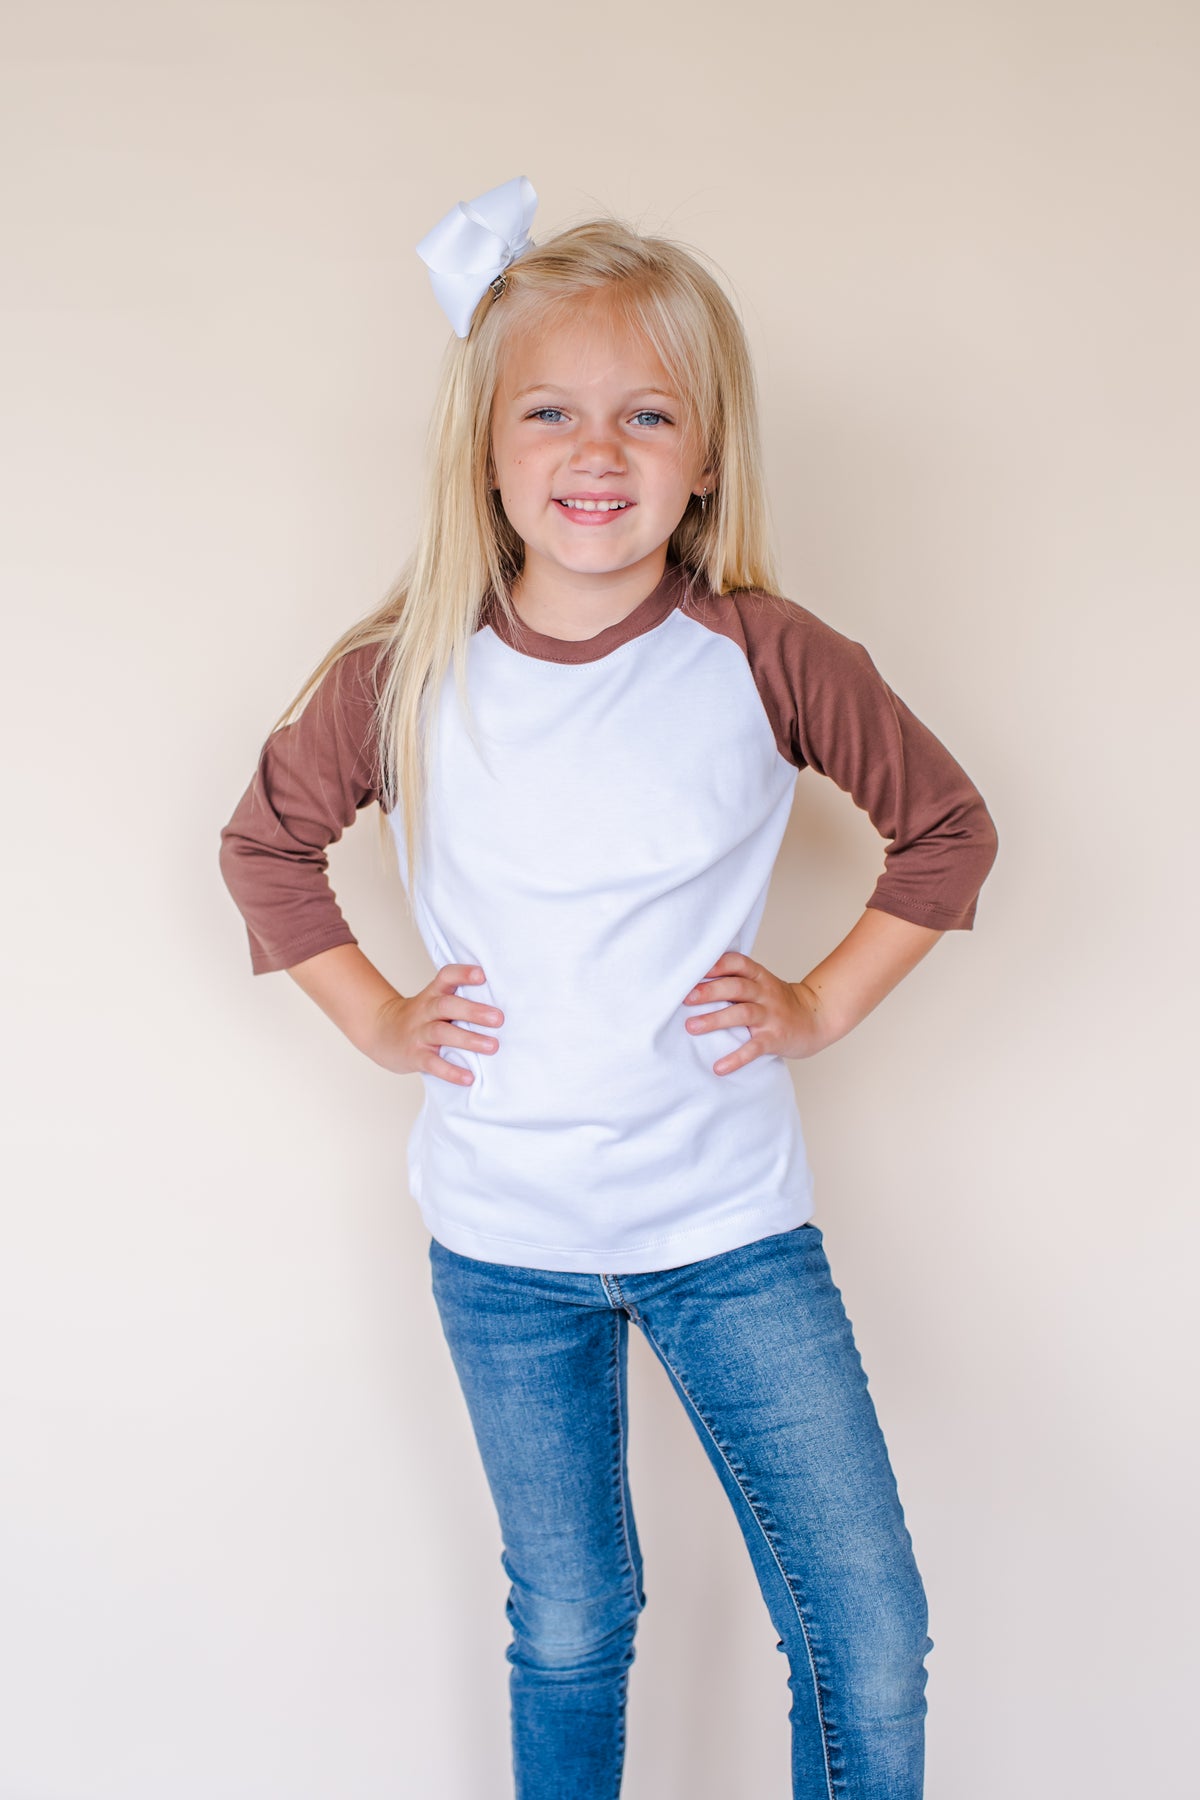 Unisex Raglan Shirt with White Body (Youth) by